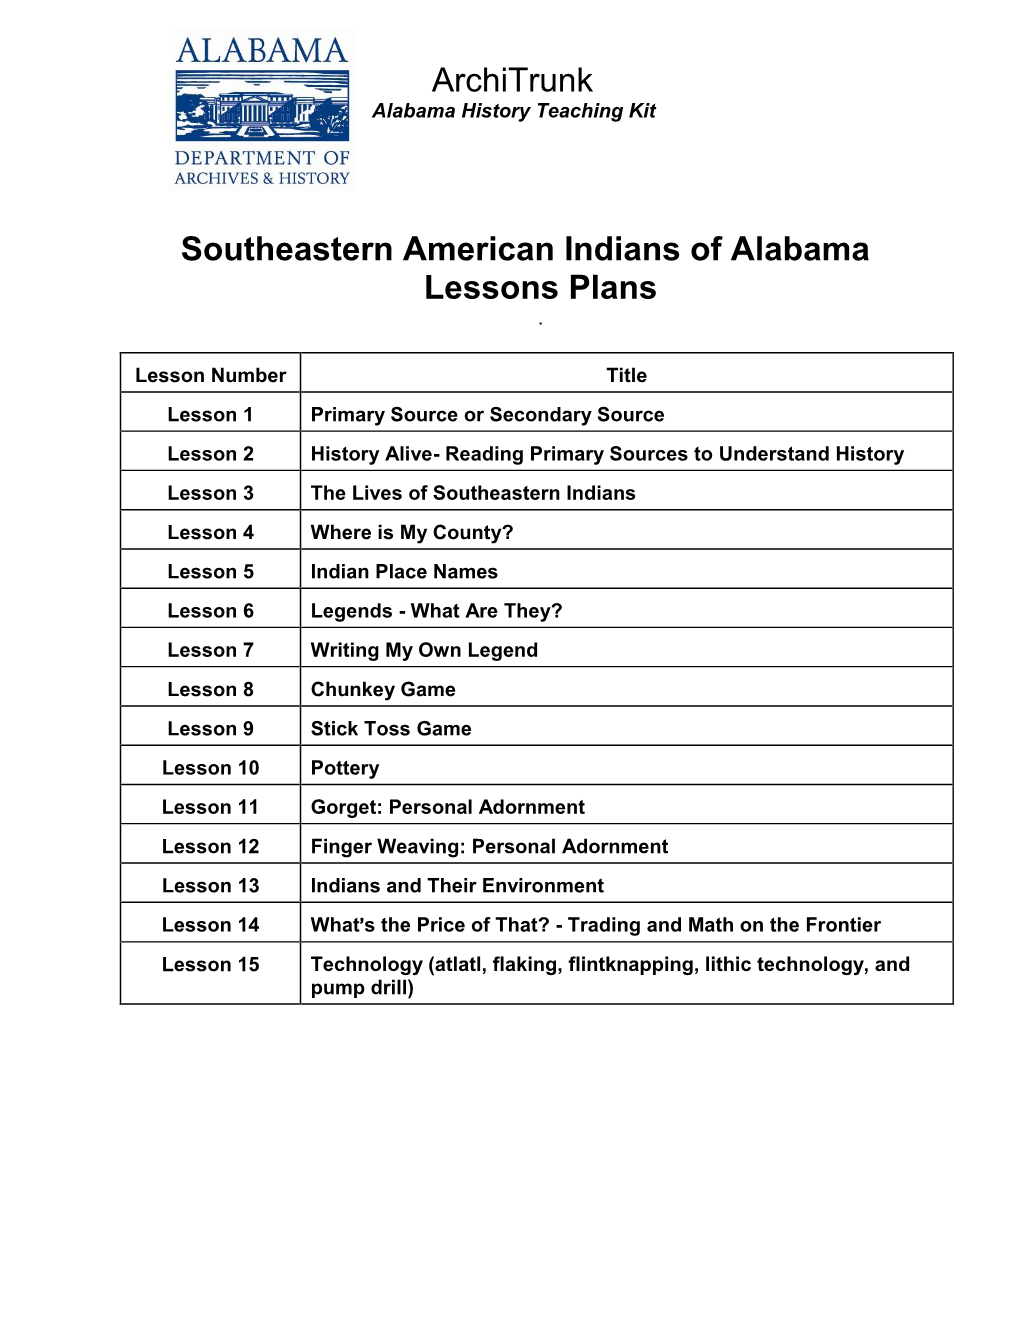 Architrunk Southeastern American Indians of Alabama Lessons Plans